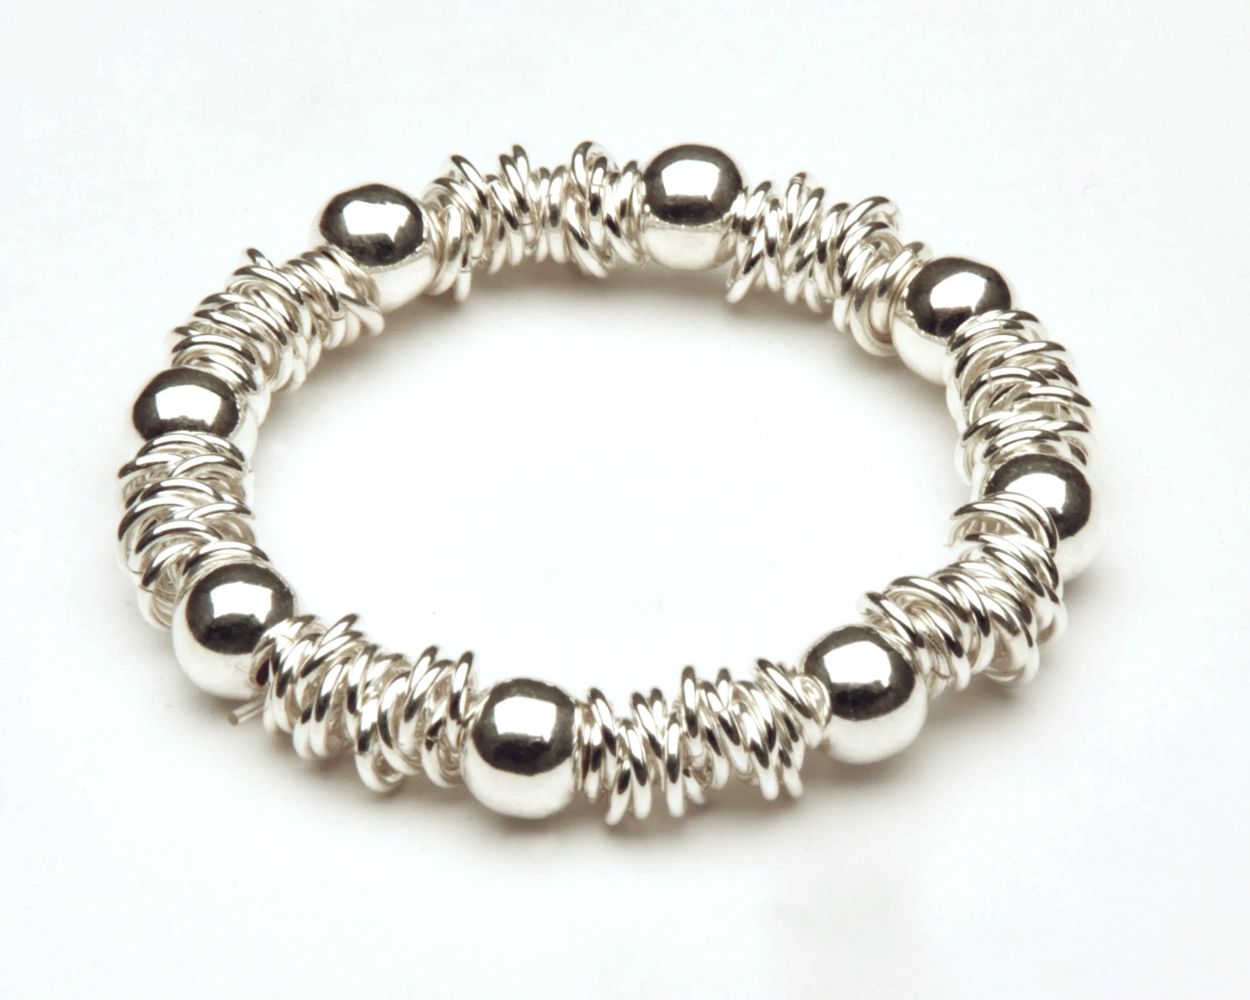 Bracelets: Elastic or adjustable with beads or sterling silver.